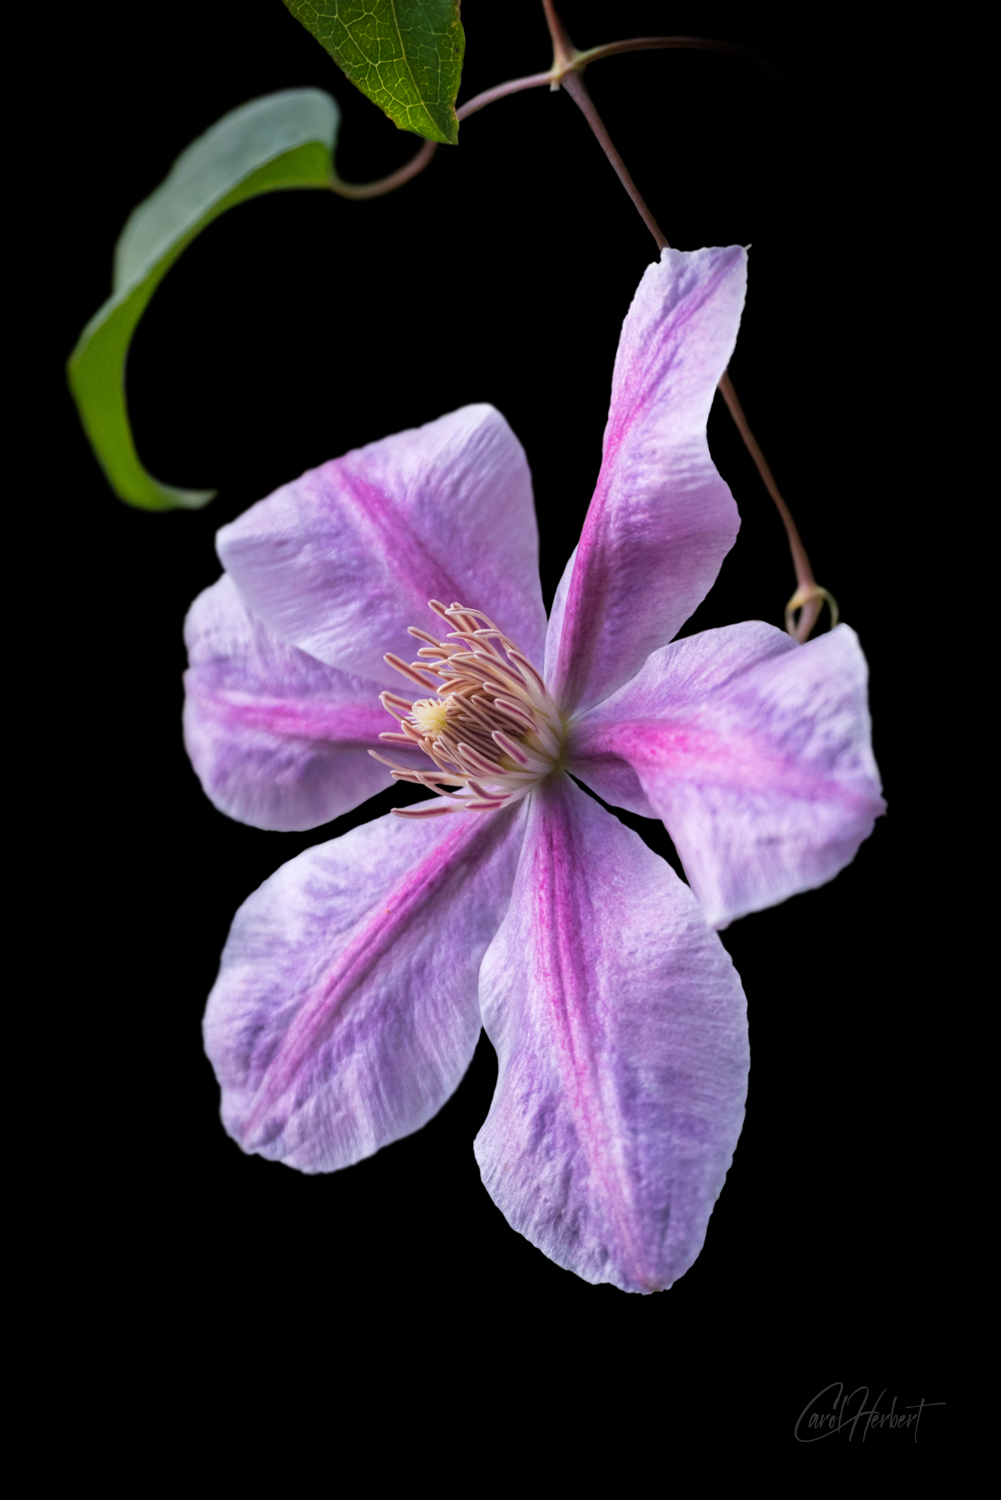 Photograph of a Pink Clematis Flower